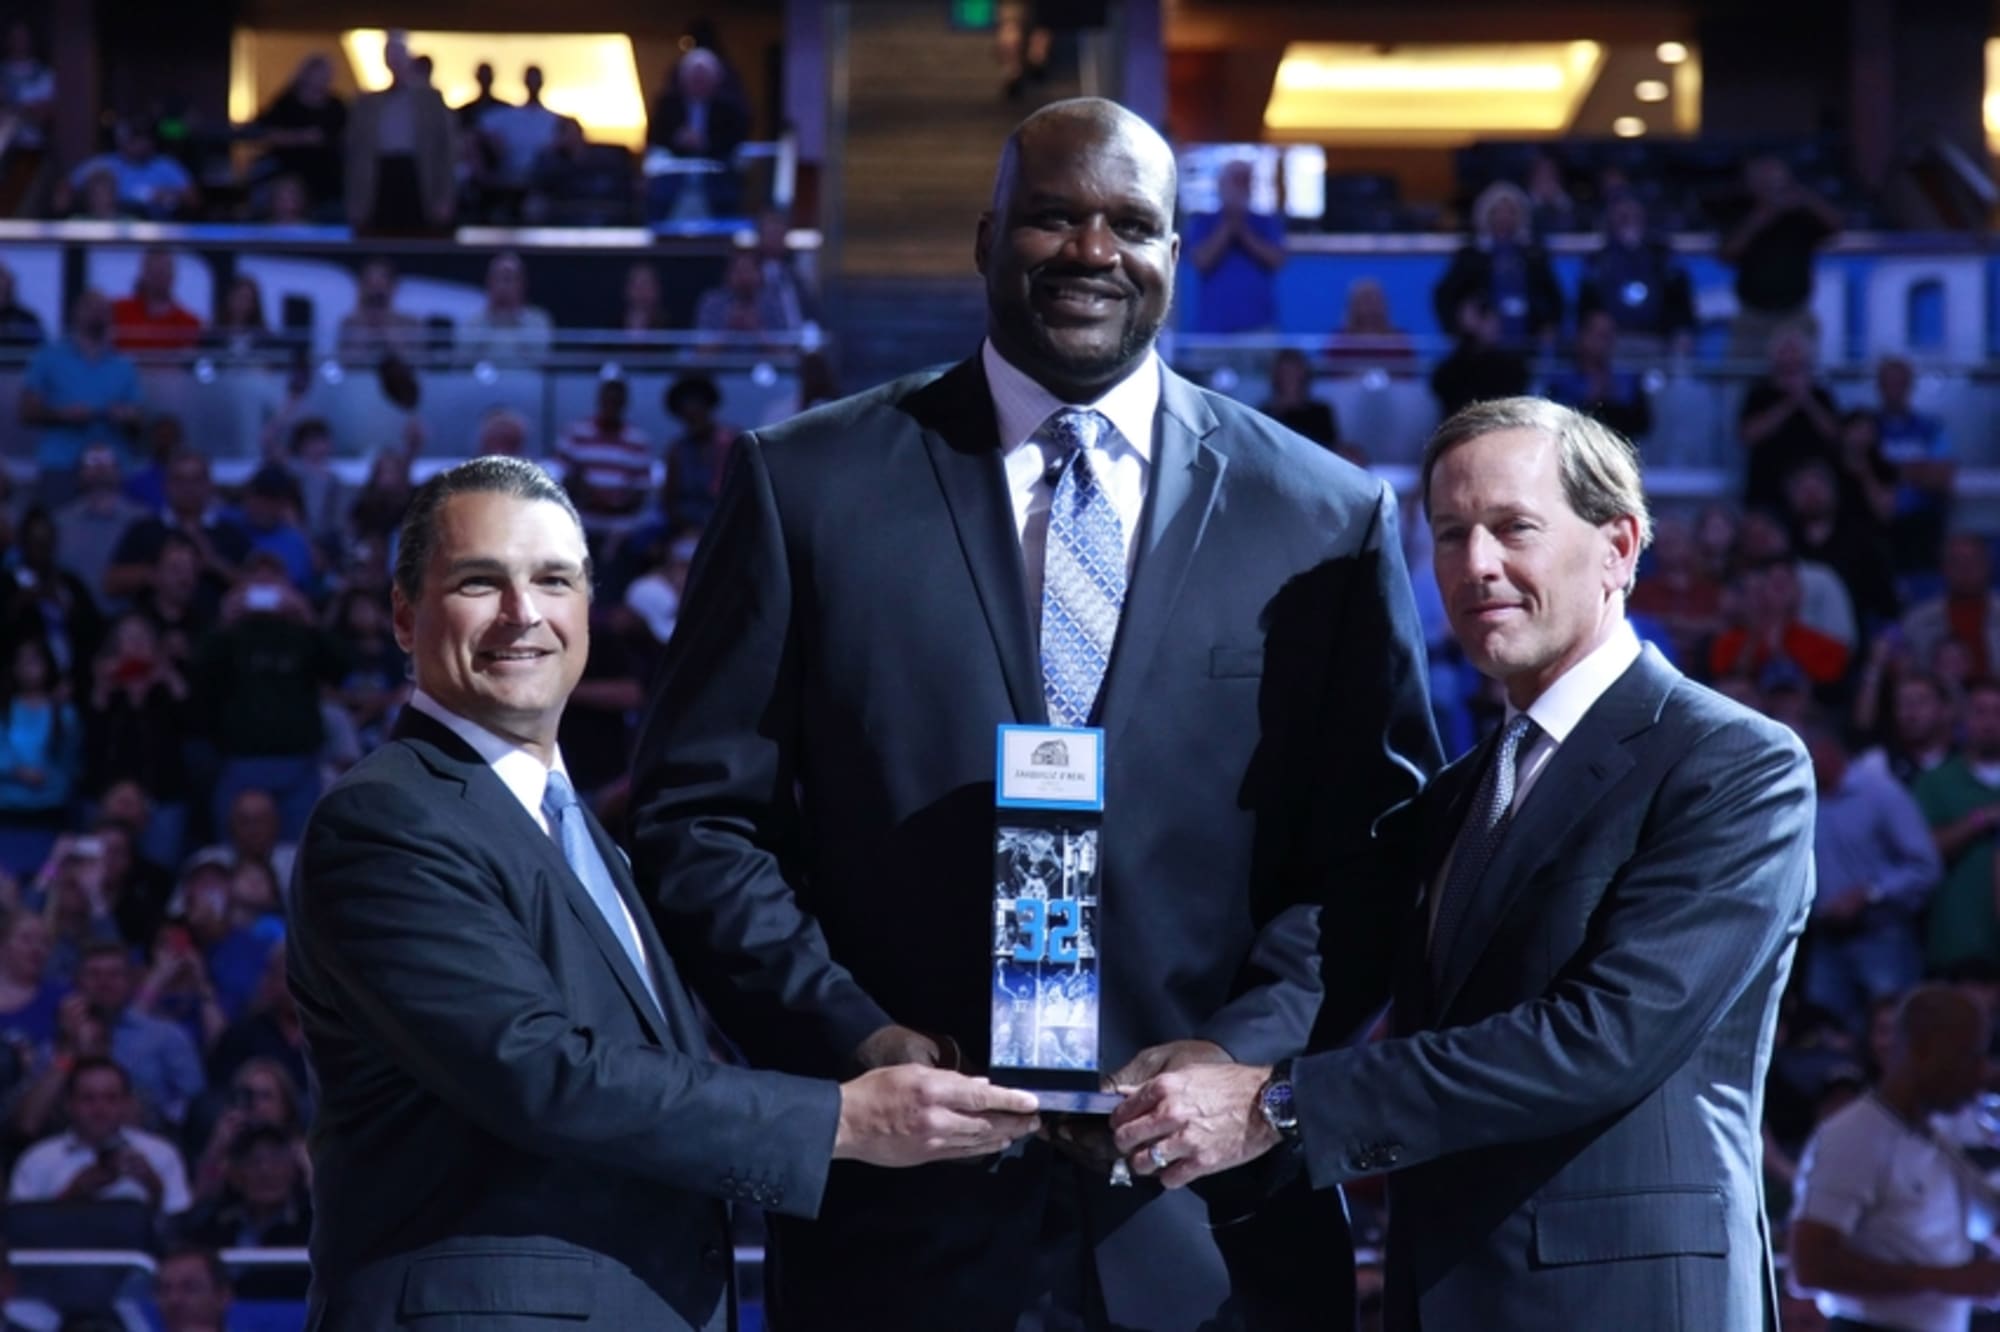 Who is Shaq and when did he retire?